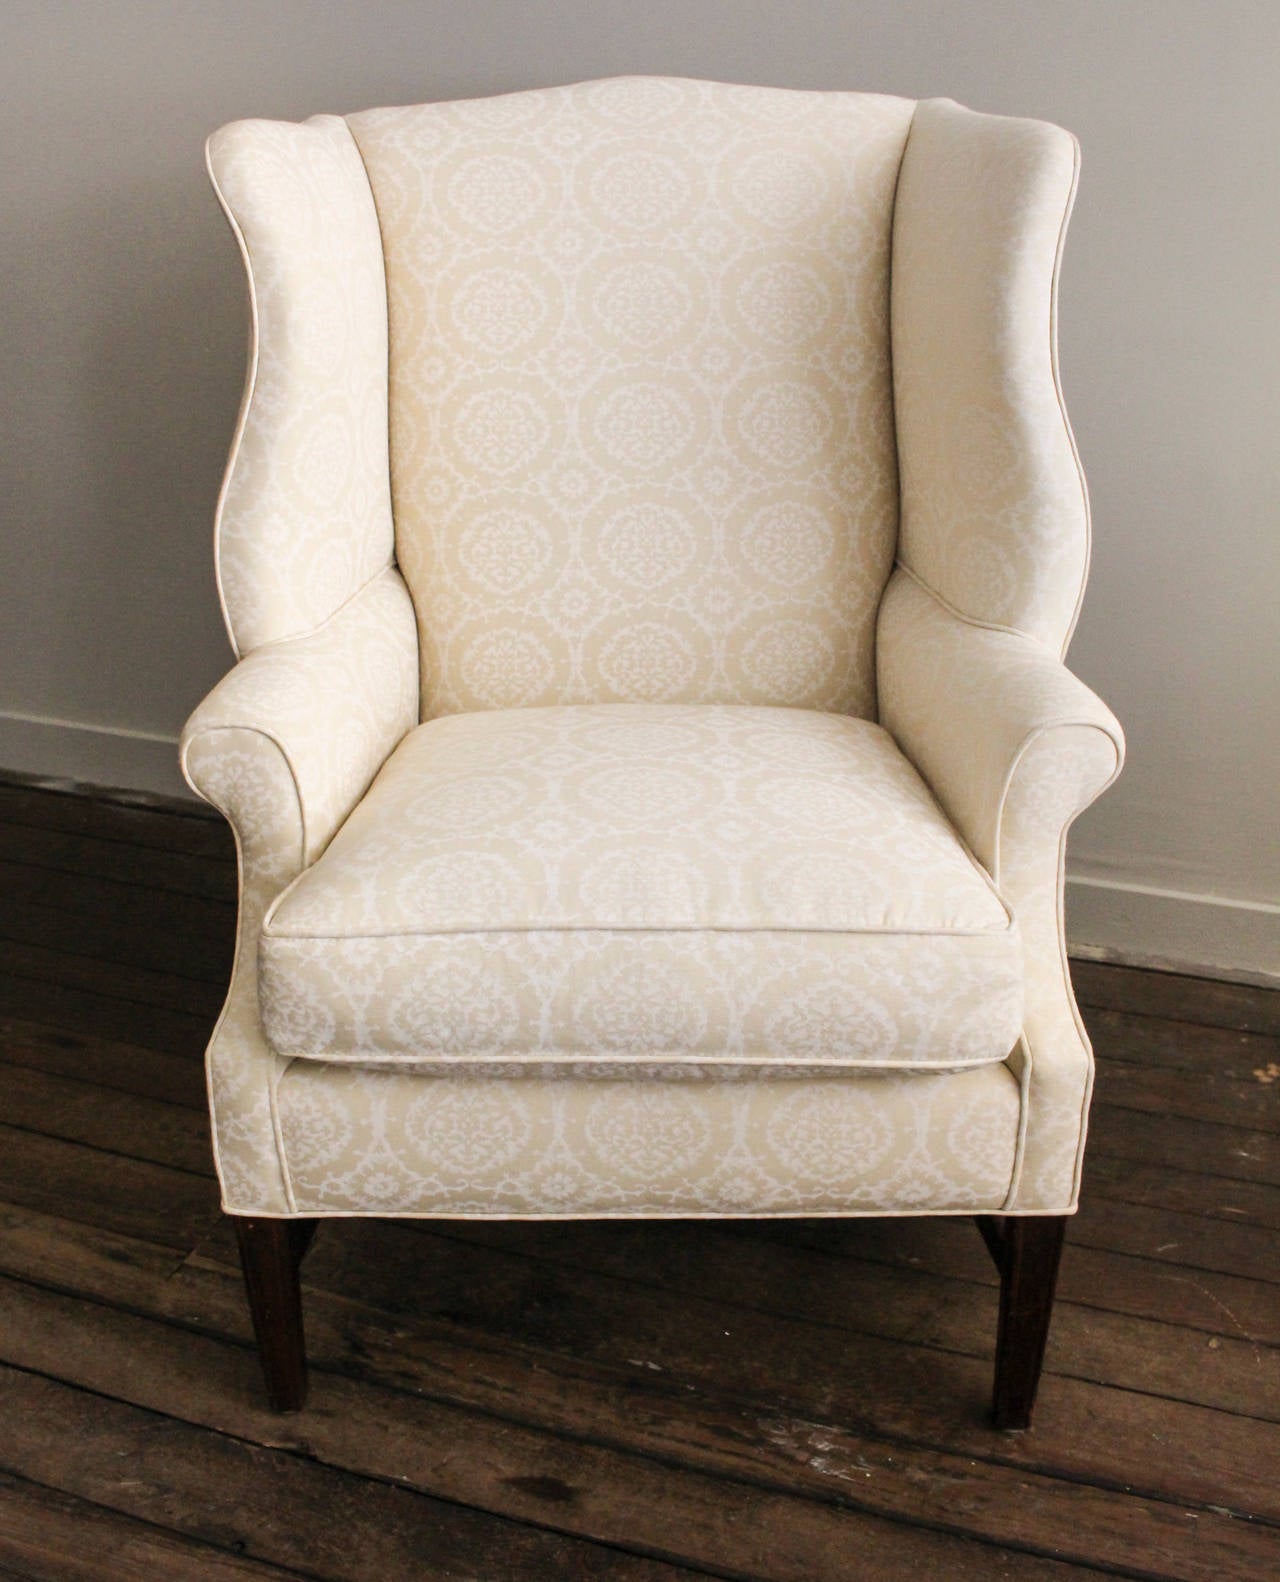 Mid-20th Century Vintage 1940s Wingback Chair